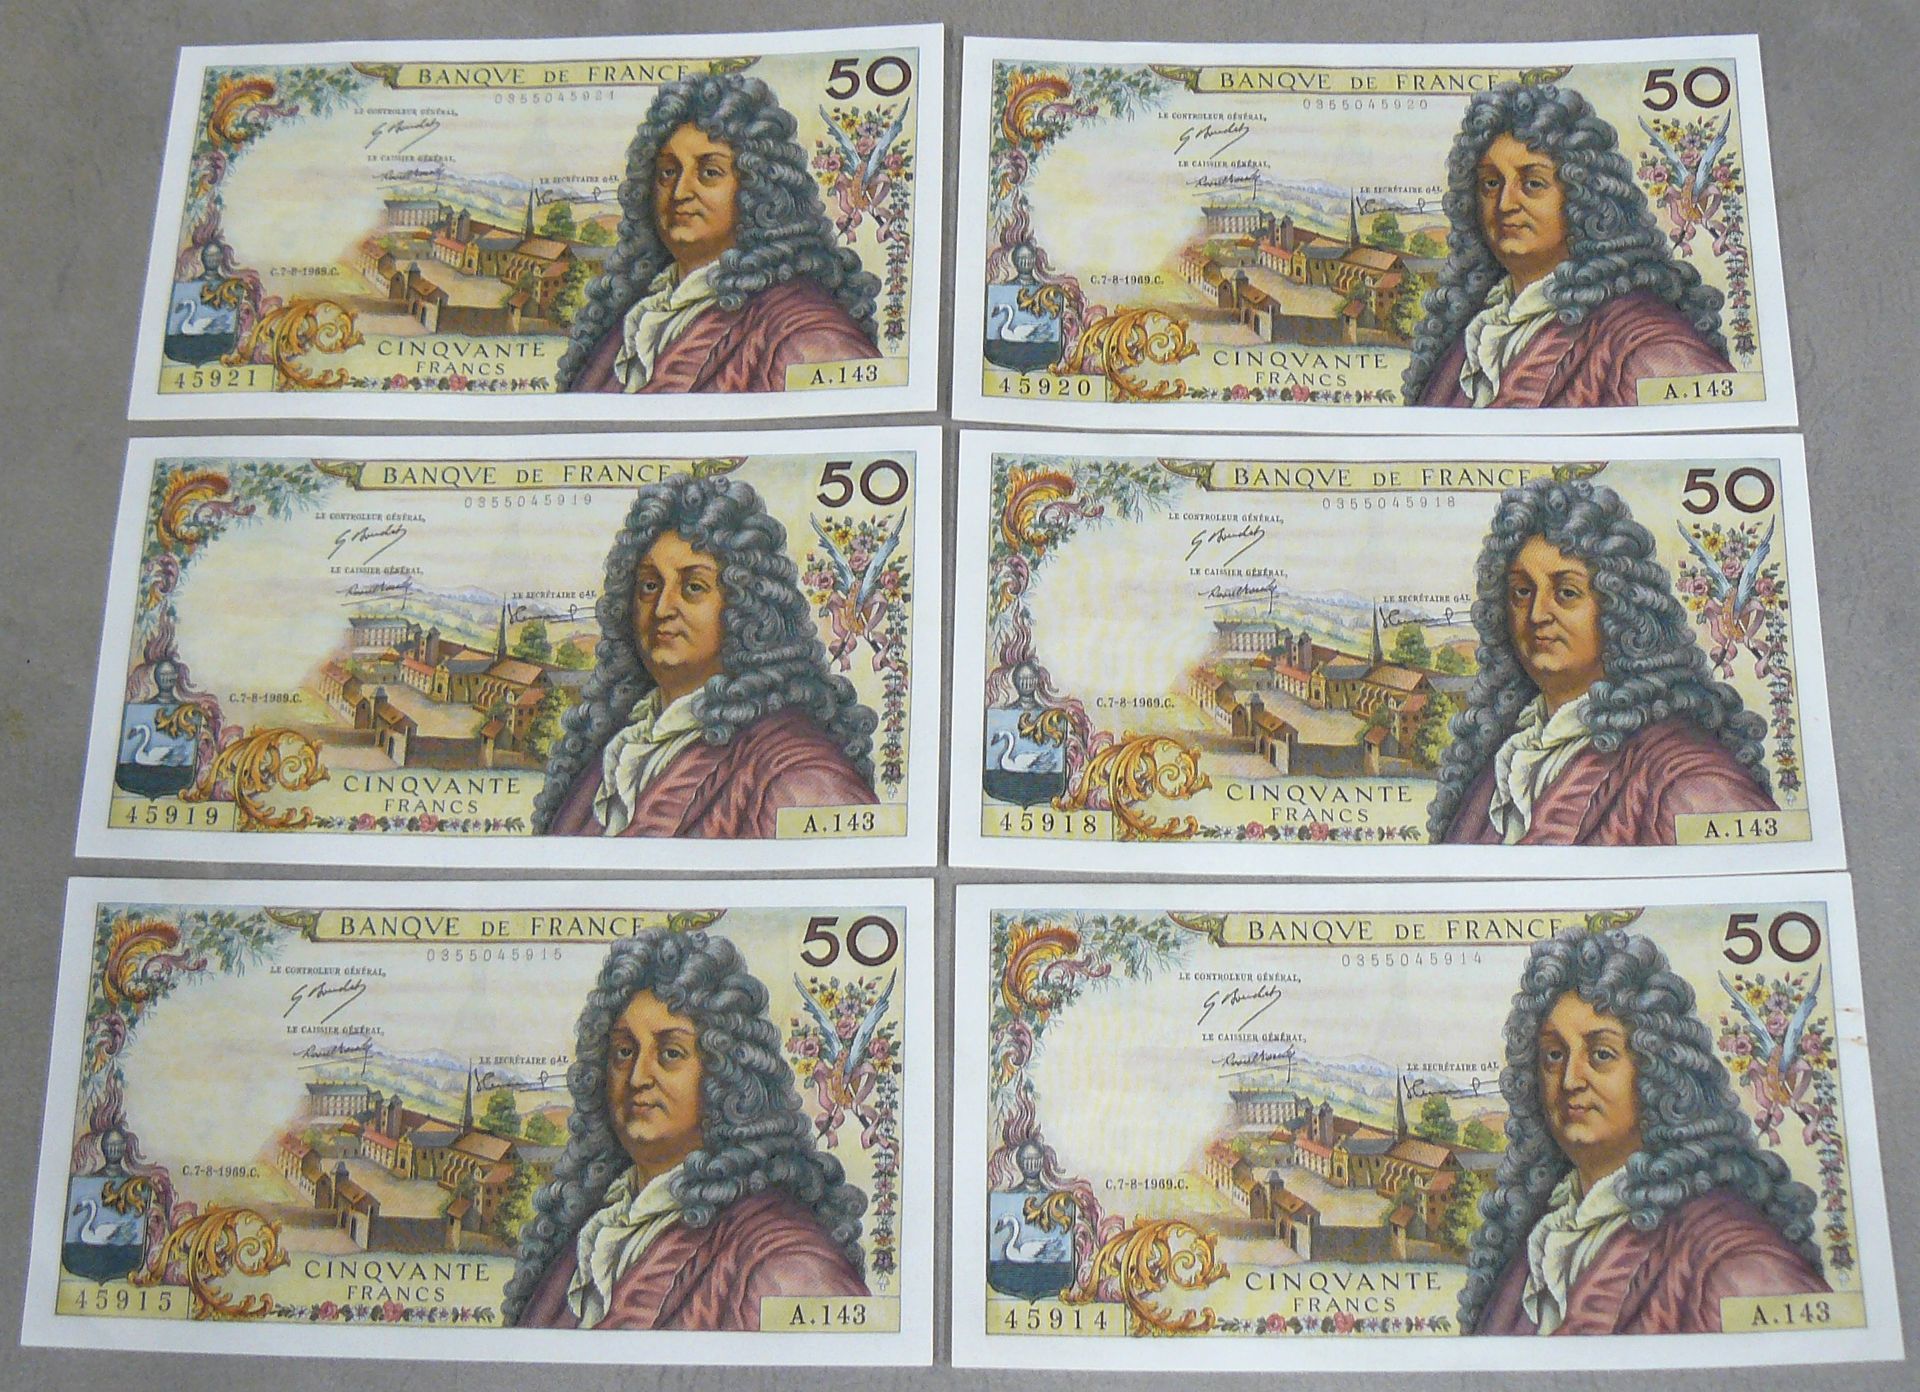 Null 50 FRANCS (RACINE) - Type 1962 - Fayette 64 - Lot of 6 banknotes, some with&hellip;